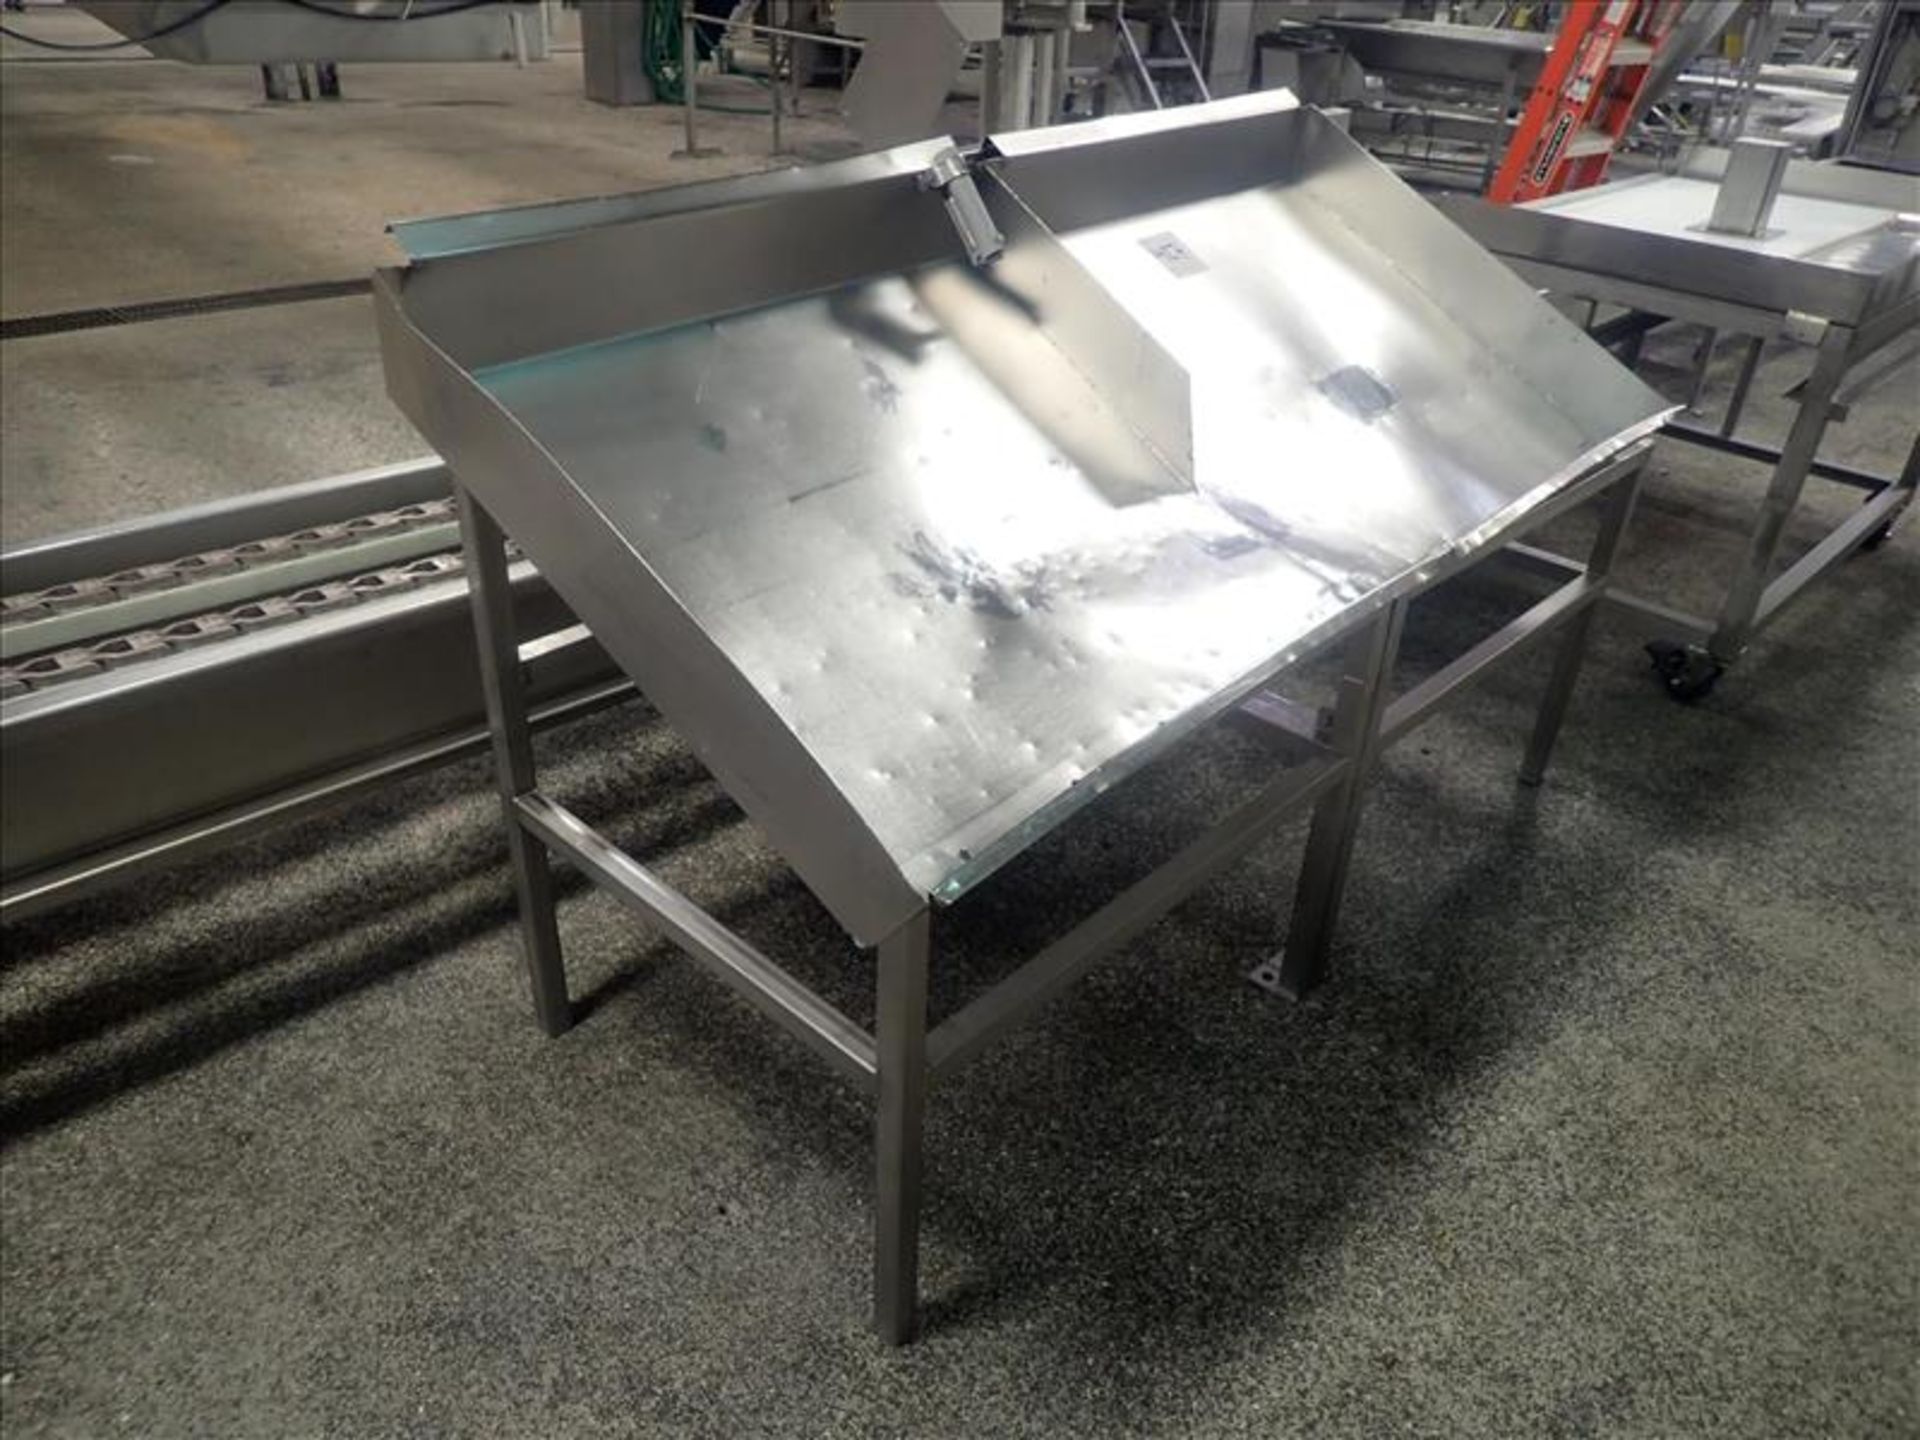 trim table, stainless steel, 36 in. x 72 in. [Loc. I.Q.F. Production/Misc.]